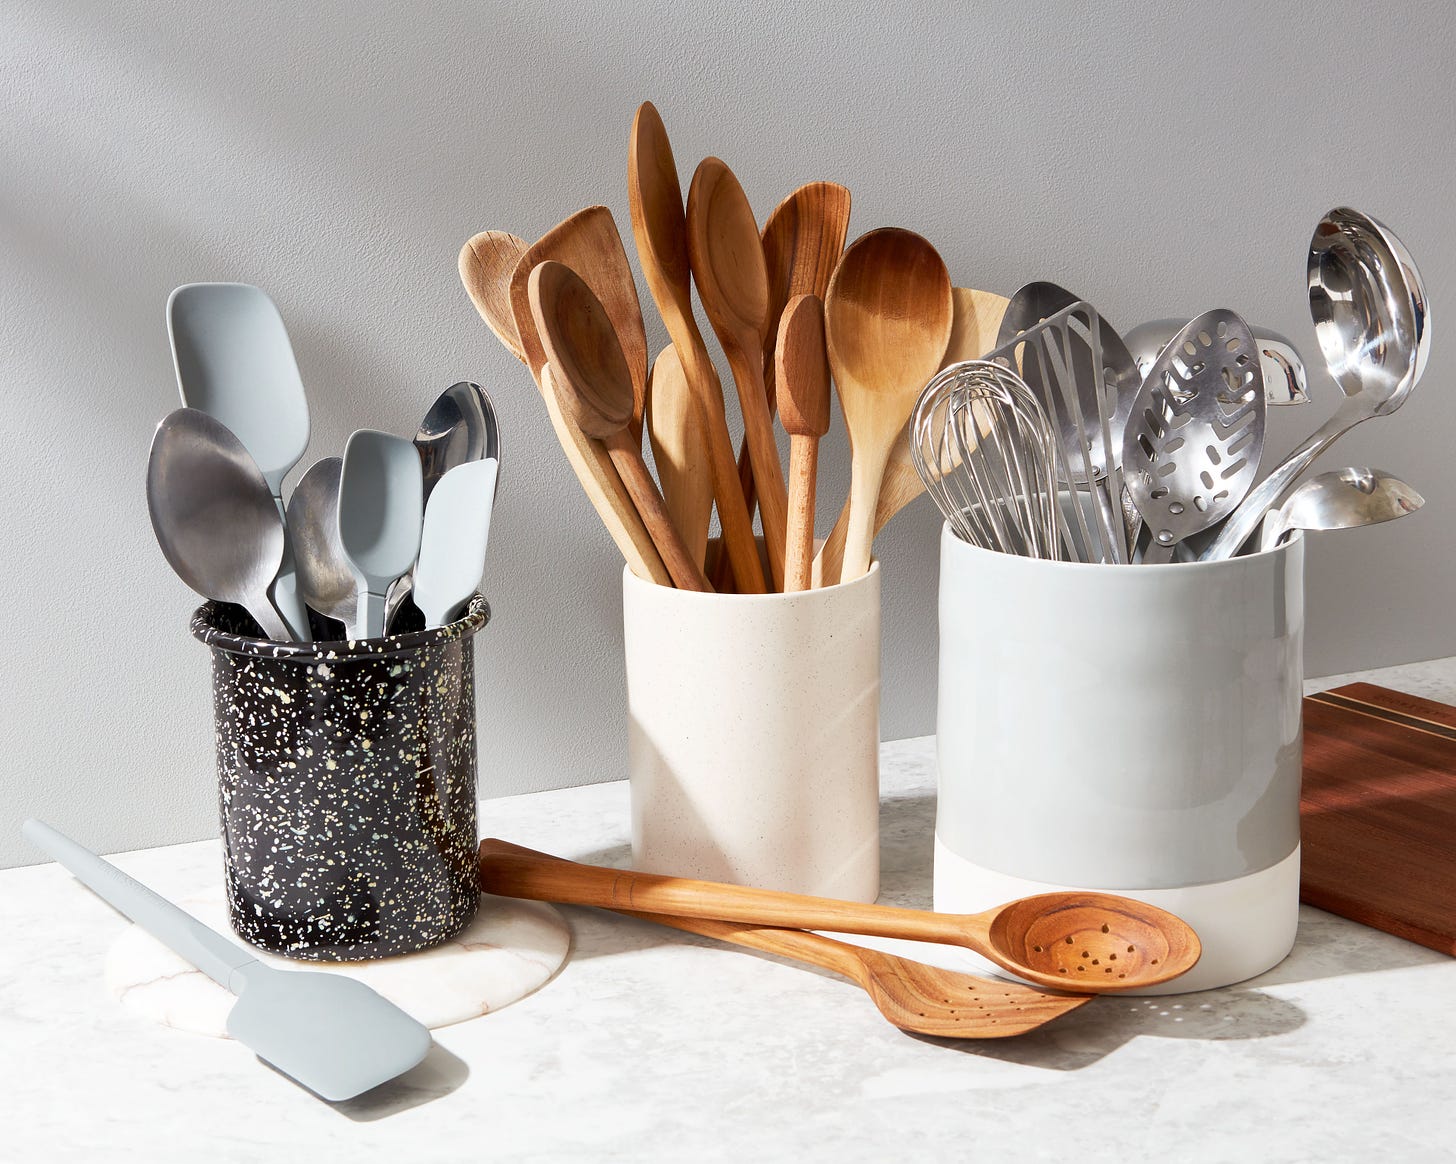 Utensil Crock Organization Tips for Any Kitchen | Epicurious